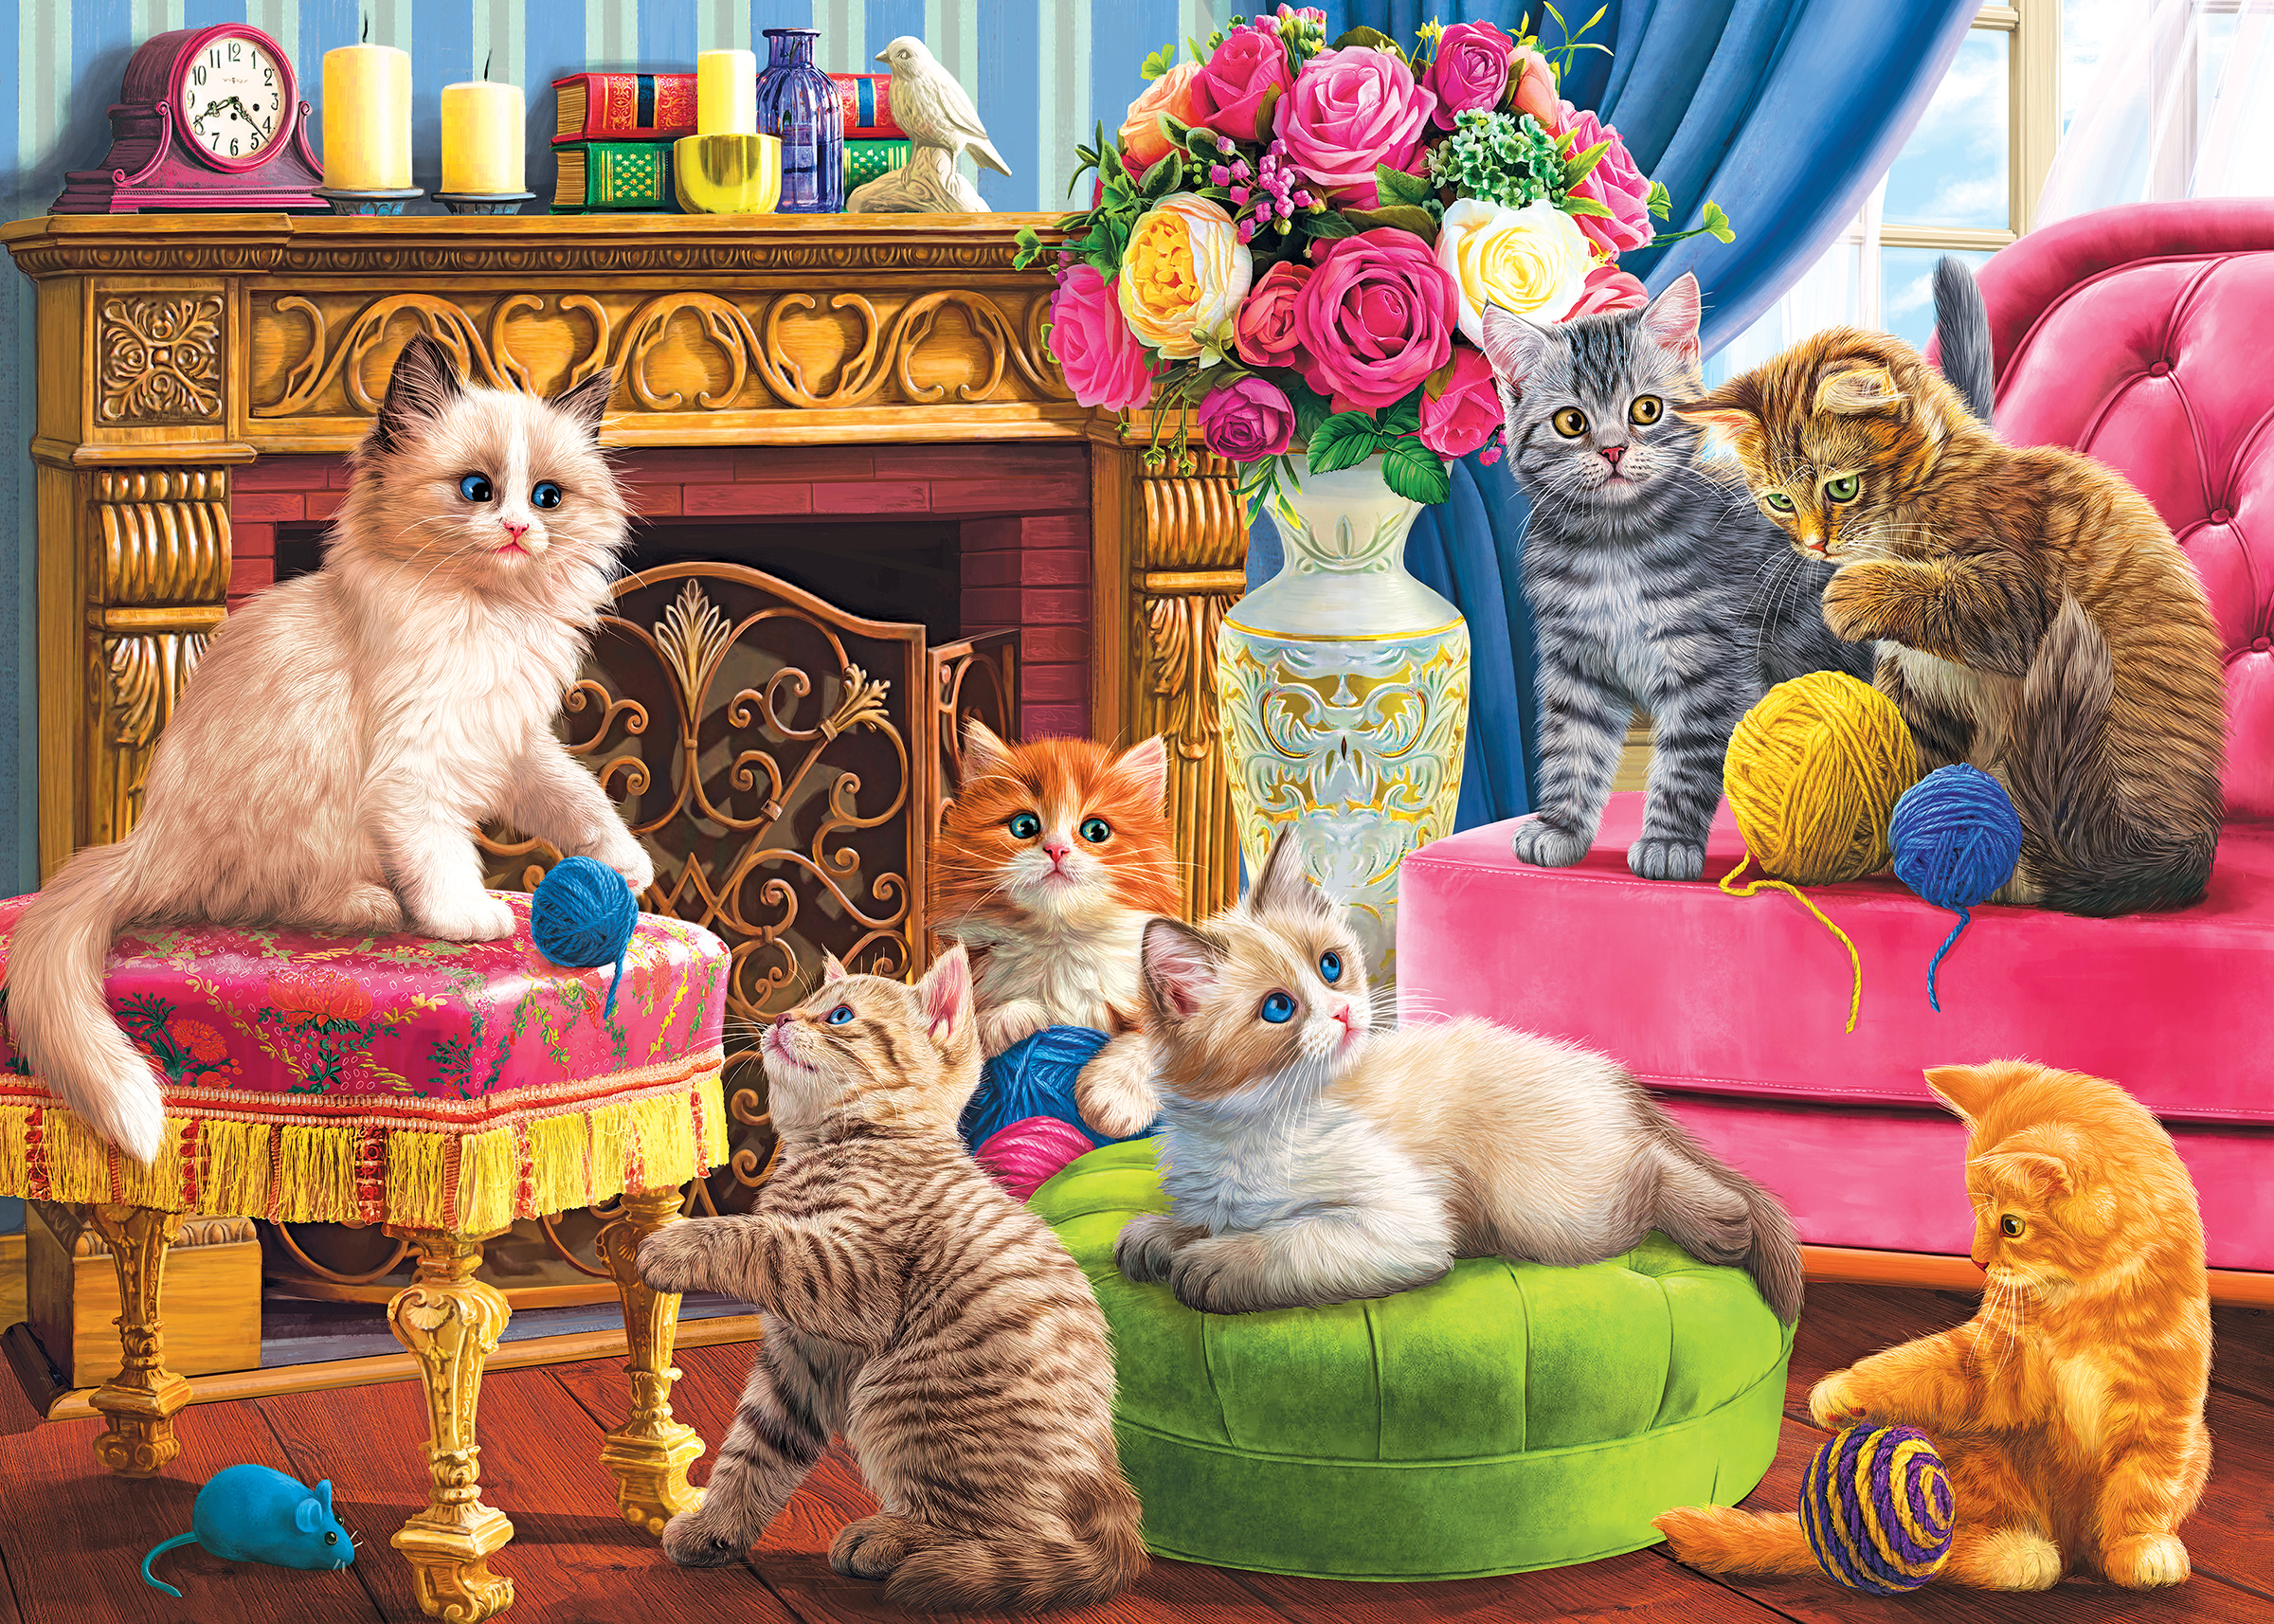 Kittens by the Fireplace Cats Jigsaw Puzzle